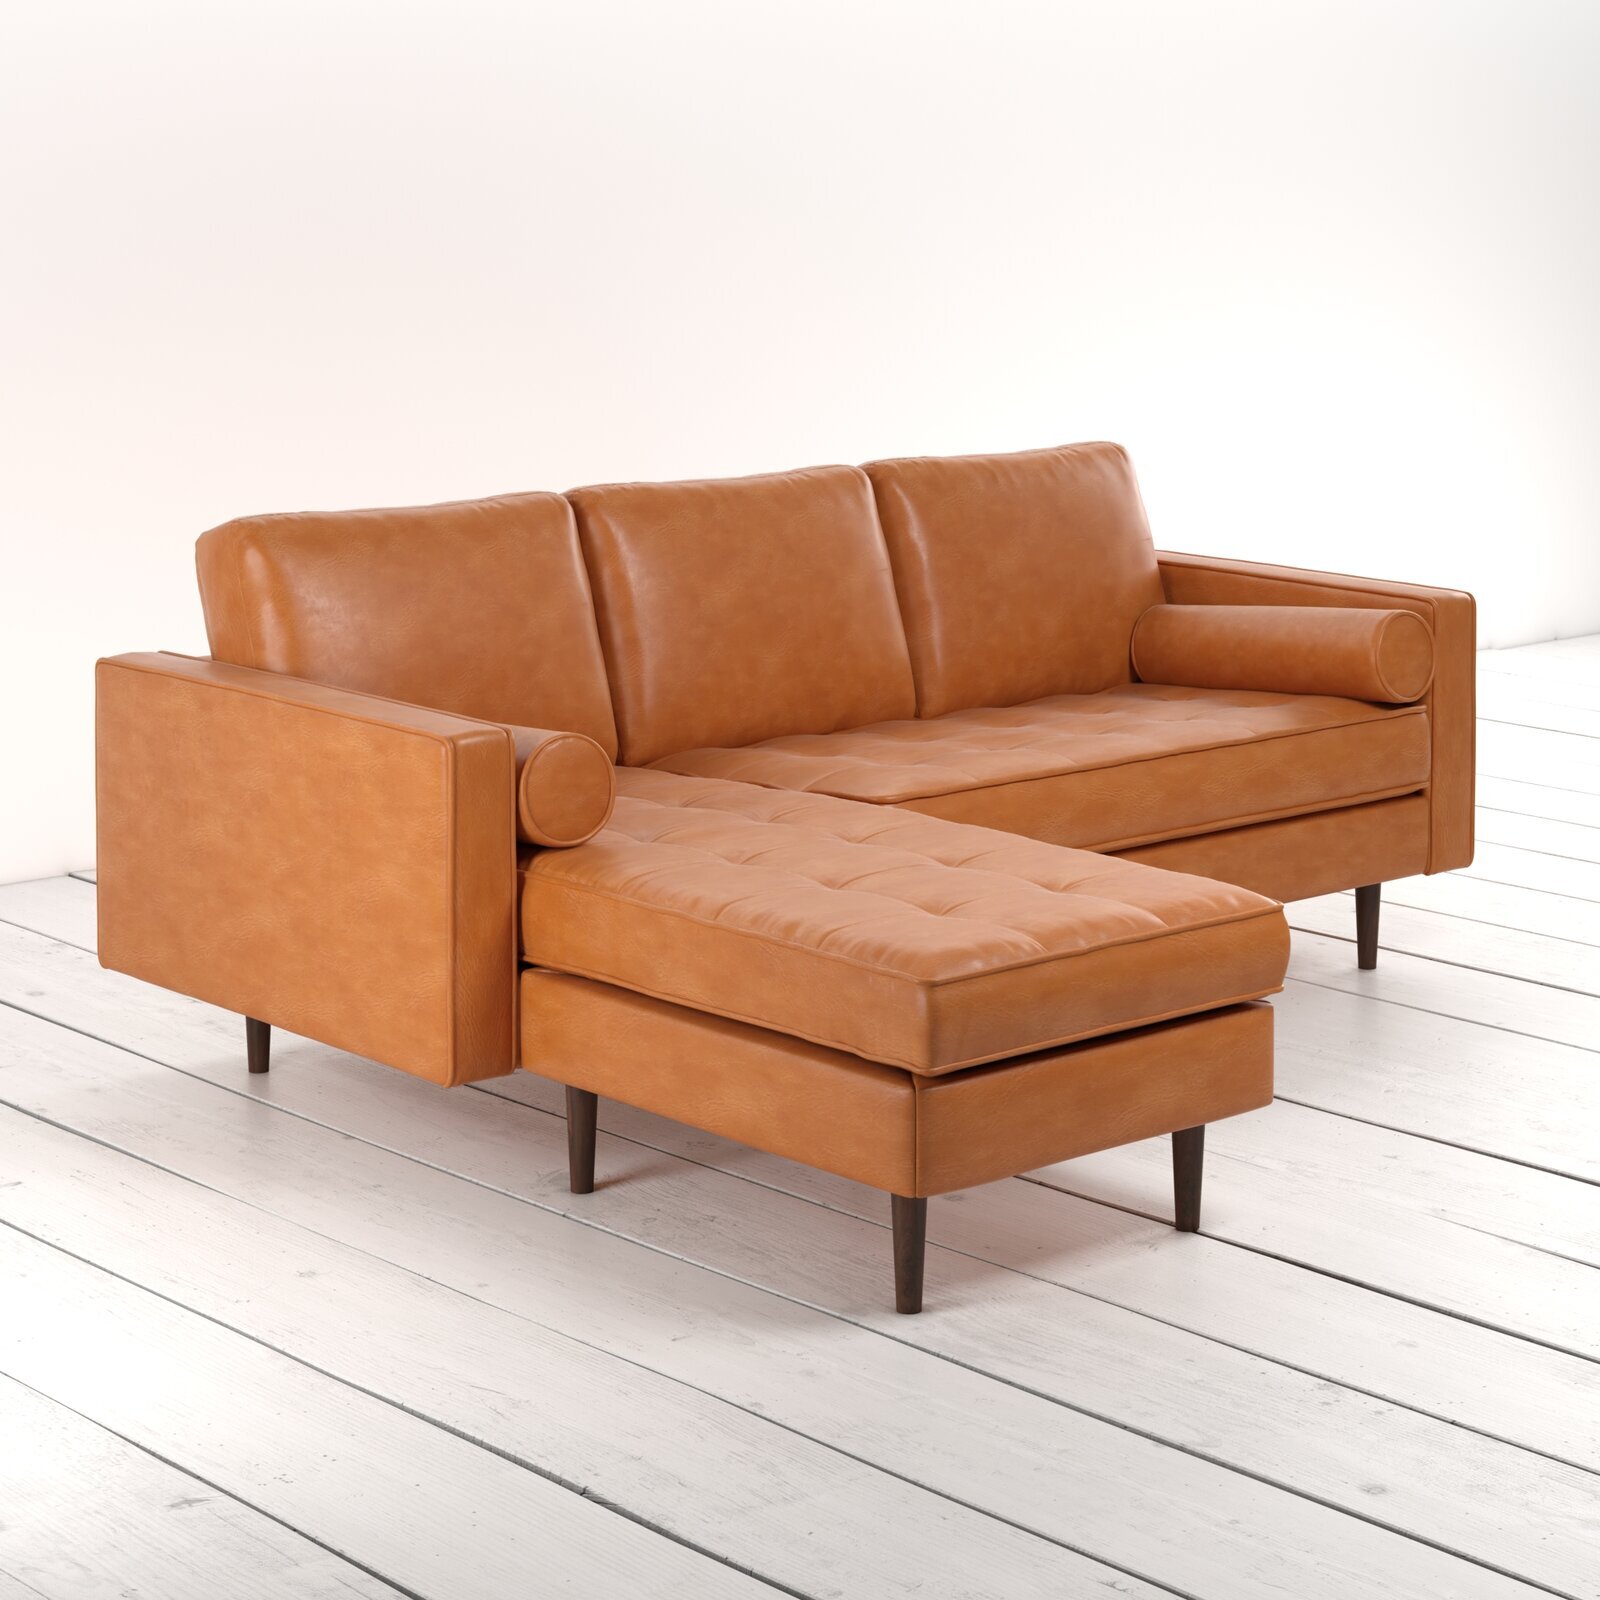 Small Genuine Leather Sectional with Chaise and Conjoined Seat Cushions